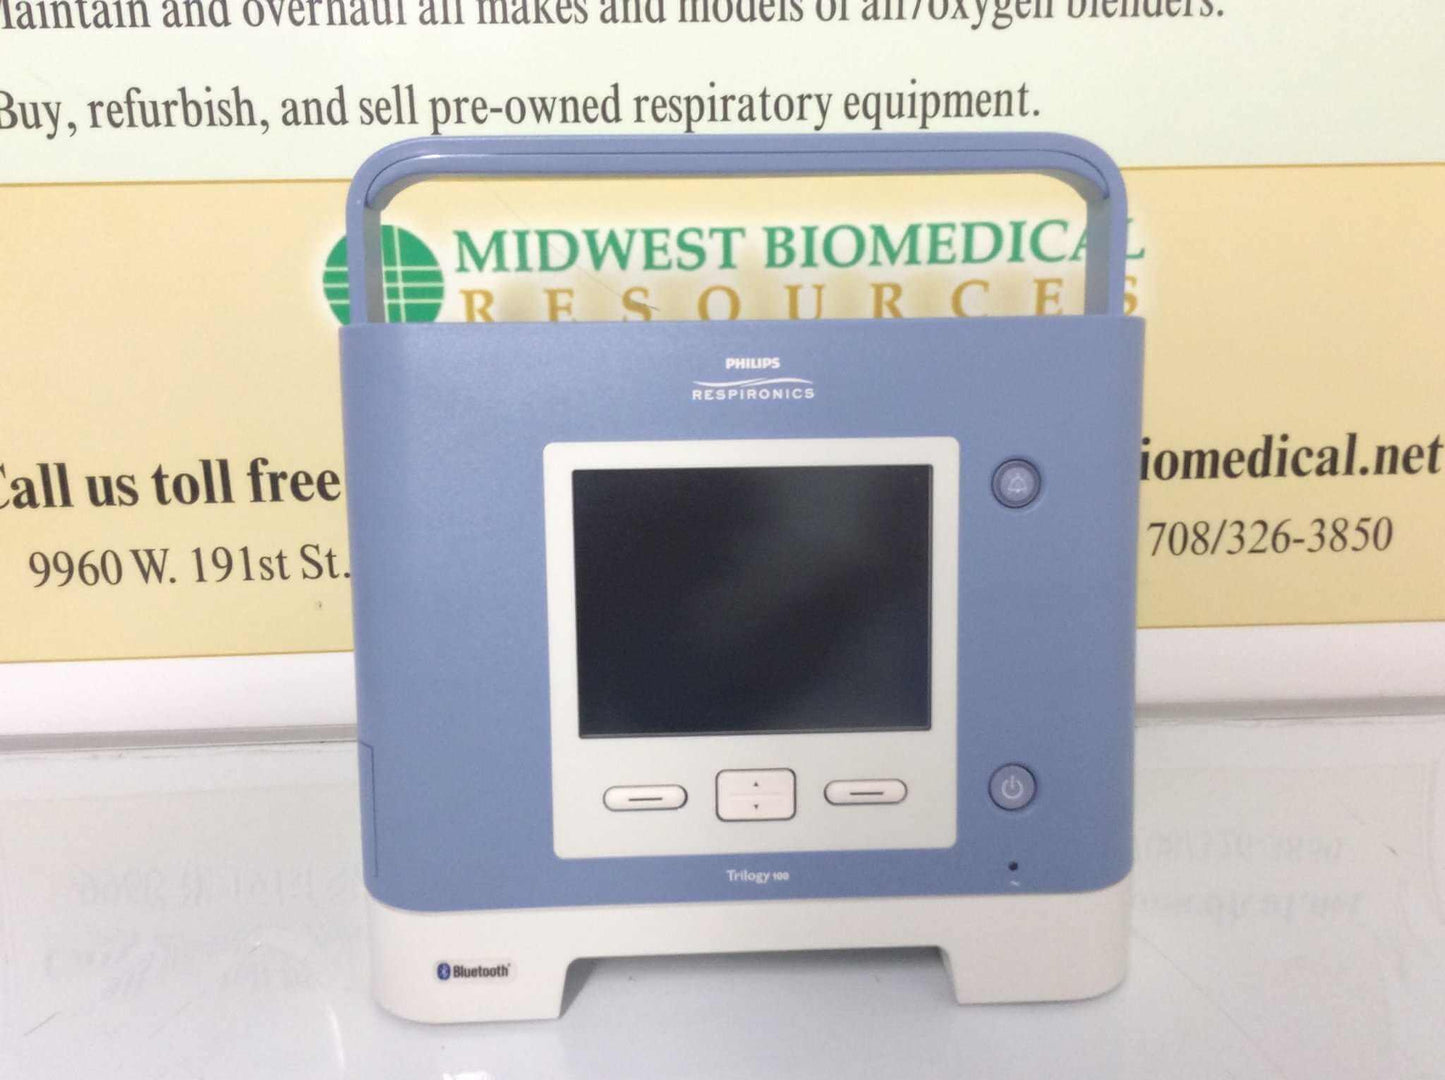 REFURBISHED Patient Ready Philips Respironics Trilogy 100 Bluetooth Medical Ventilator with Accessories 1054260B Warranty FREE Shipping - MBR Medicals